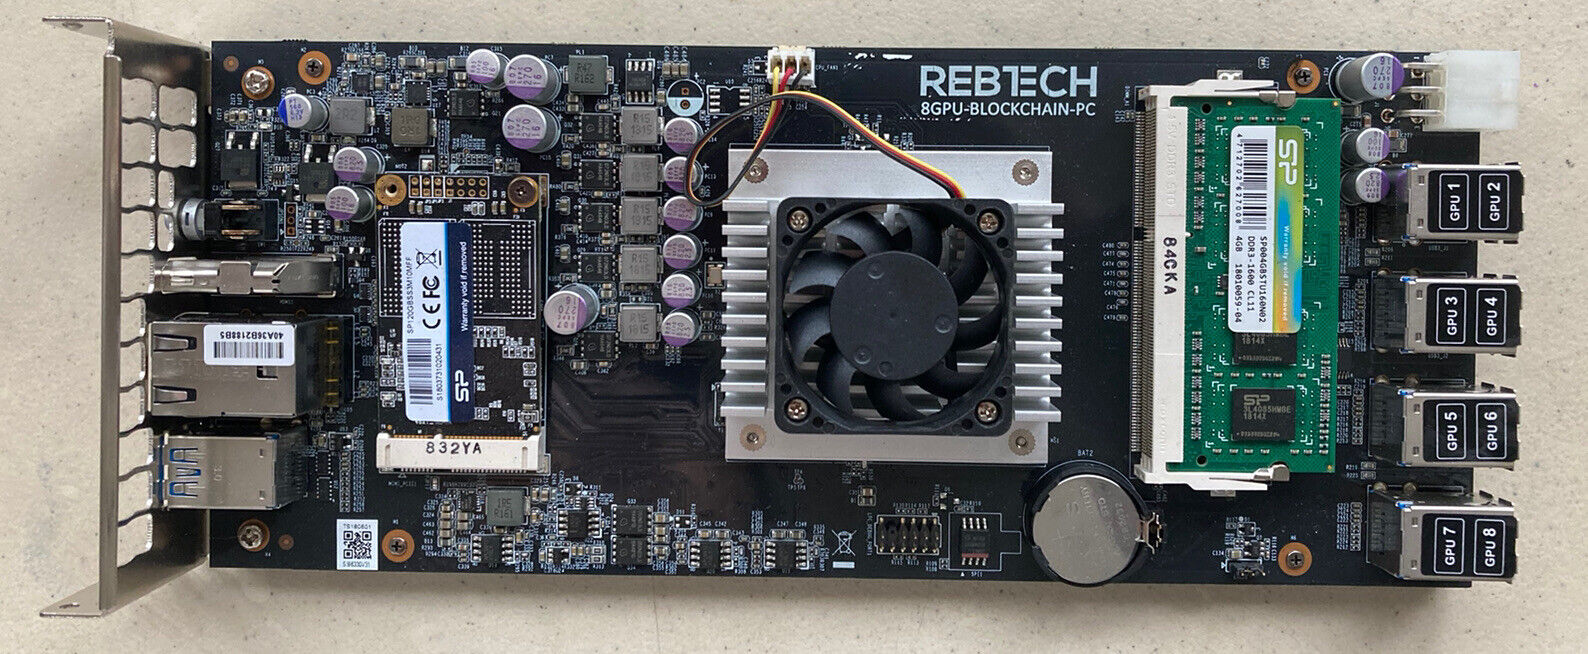 REBTECH ALL-IN ONE WITH PROCESSOR AND RAM MOTHERBOARD - 8 GPU MINER MINING RIG